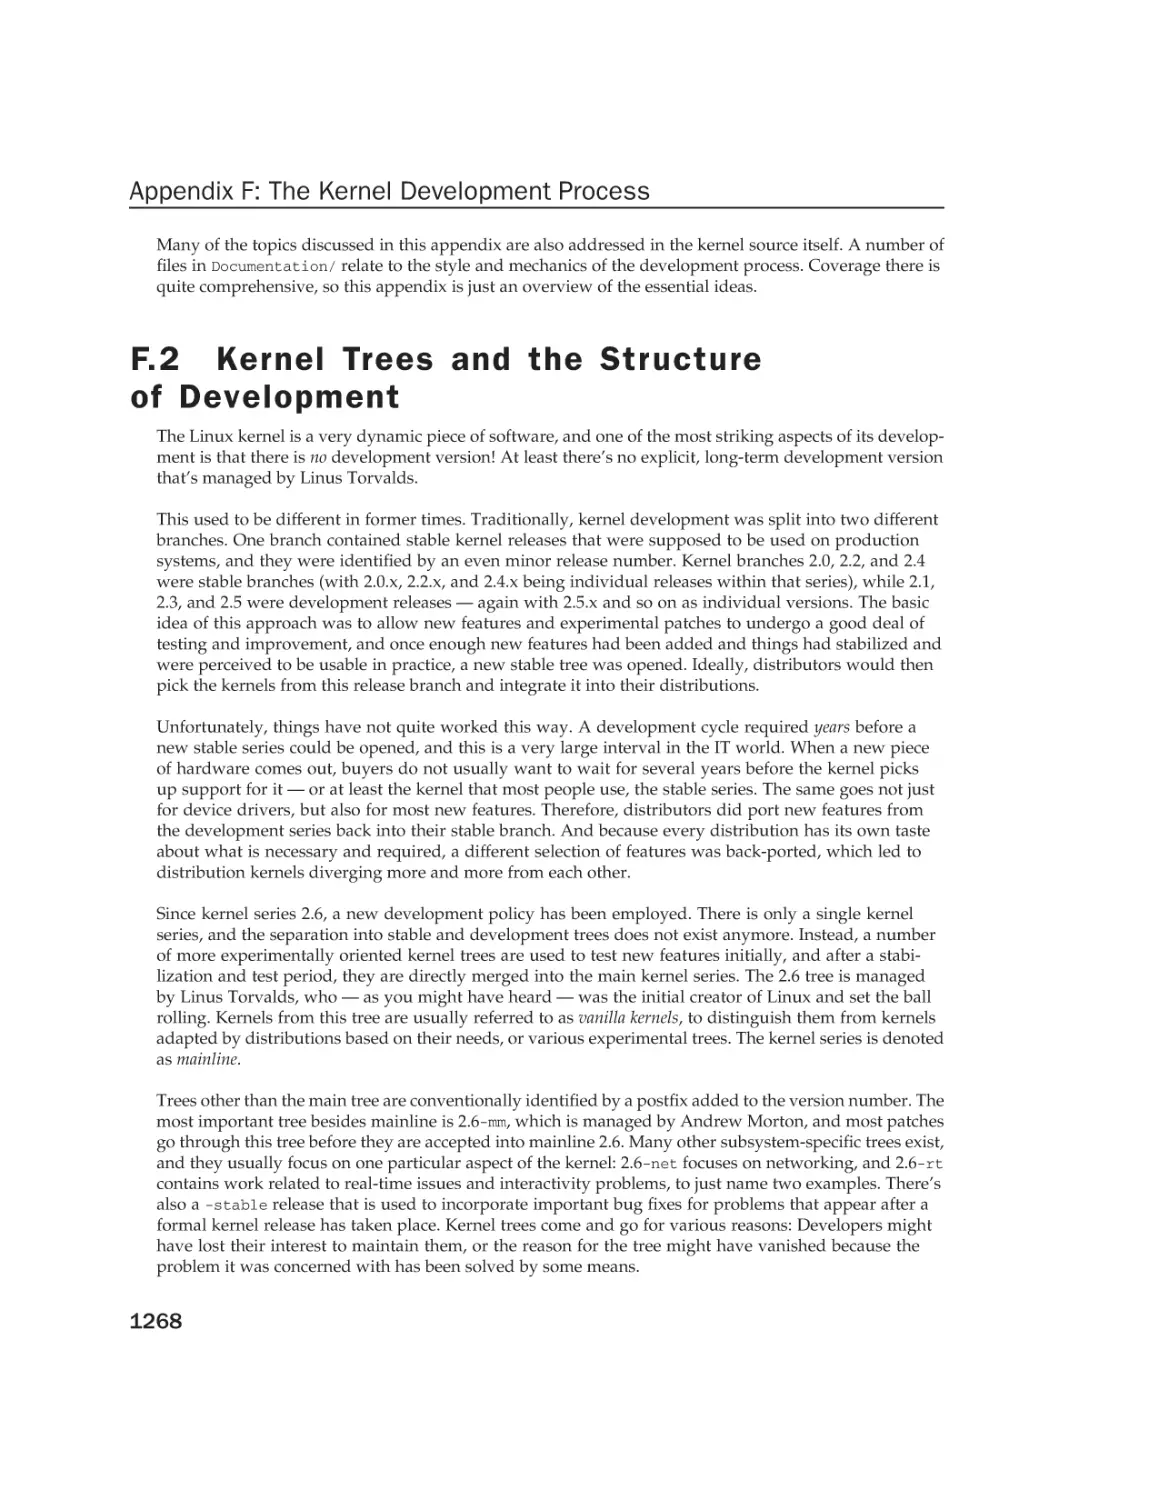 F.2 Kernel Trees and the Structure of Development